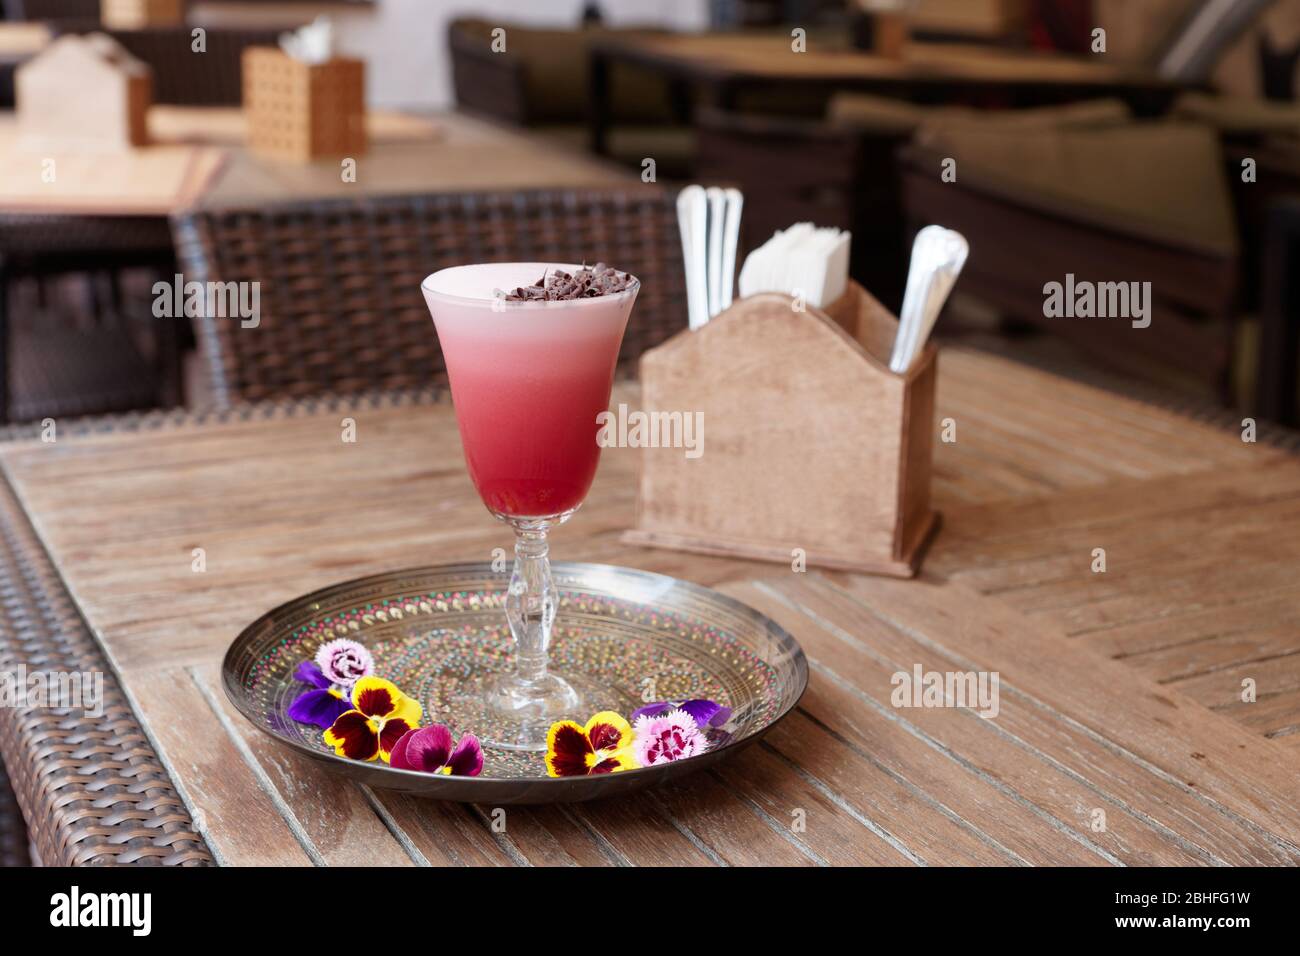 Red cocktail with froth and chocolate shaving on restaurant table Stock Photo